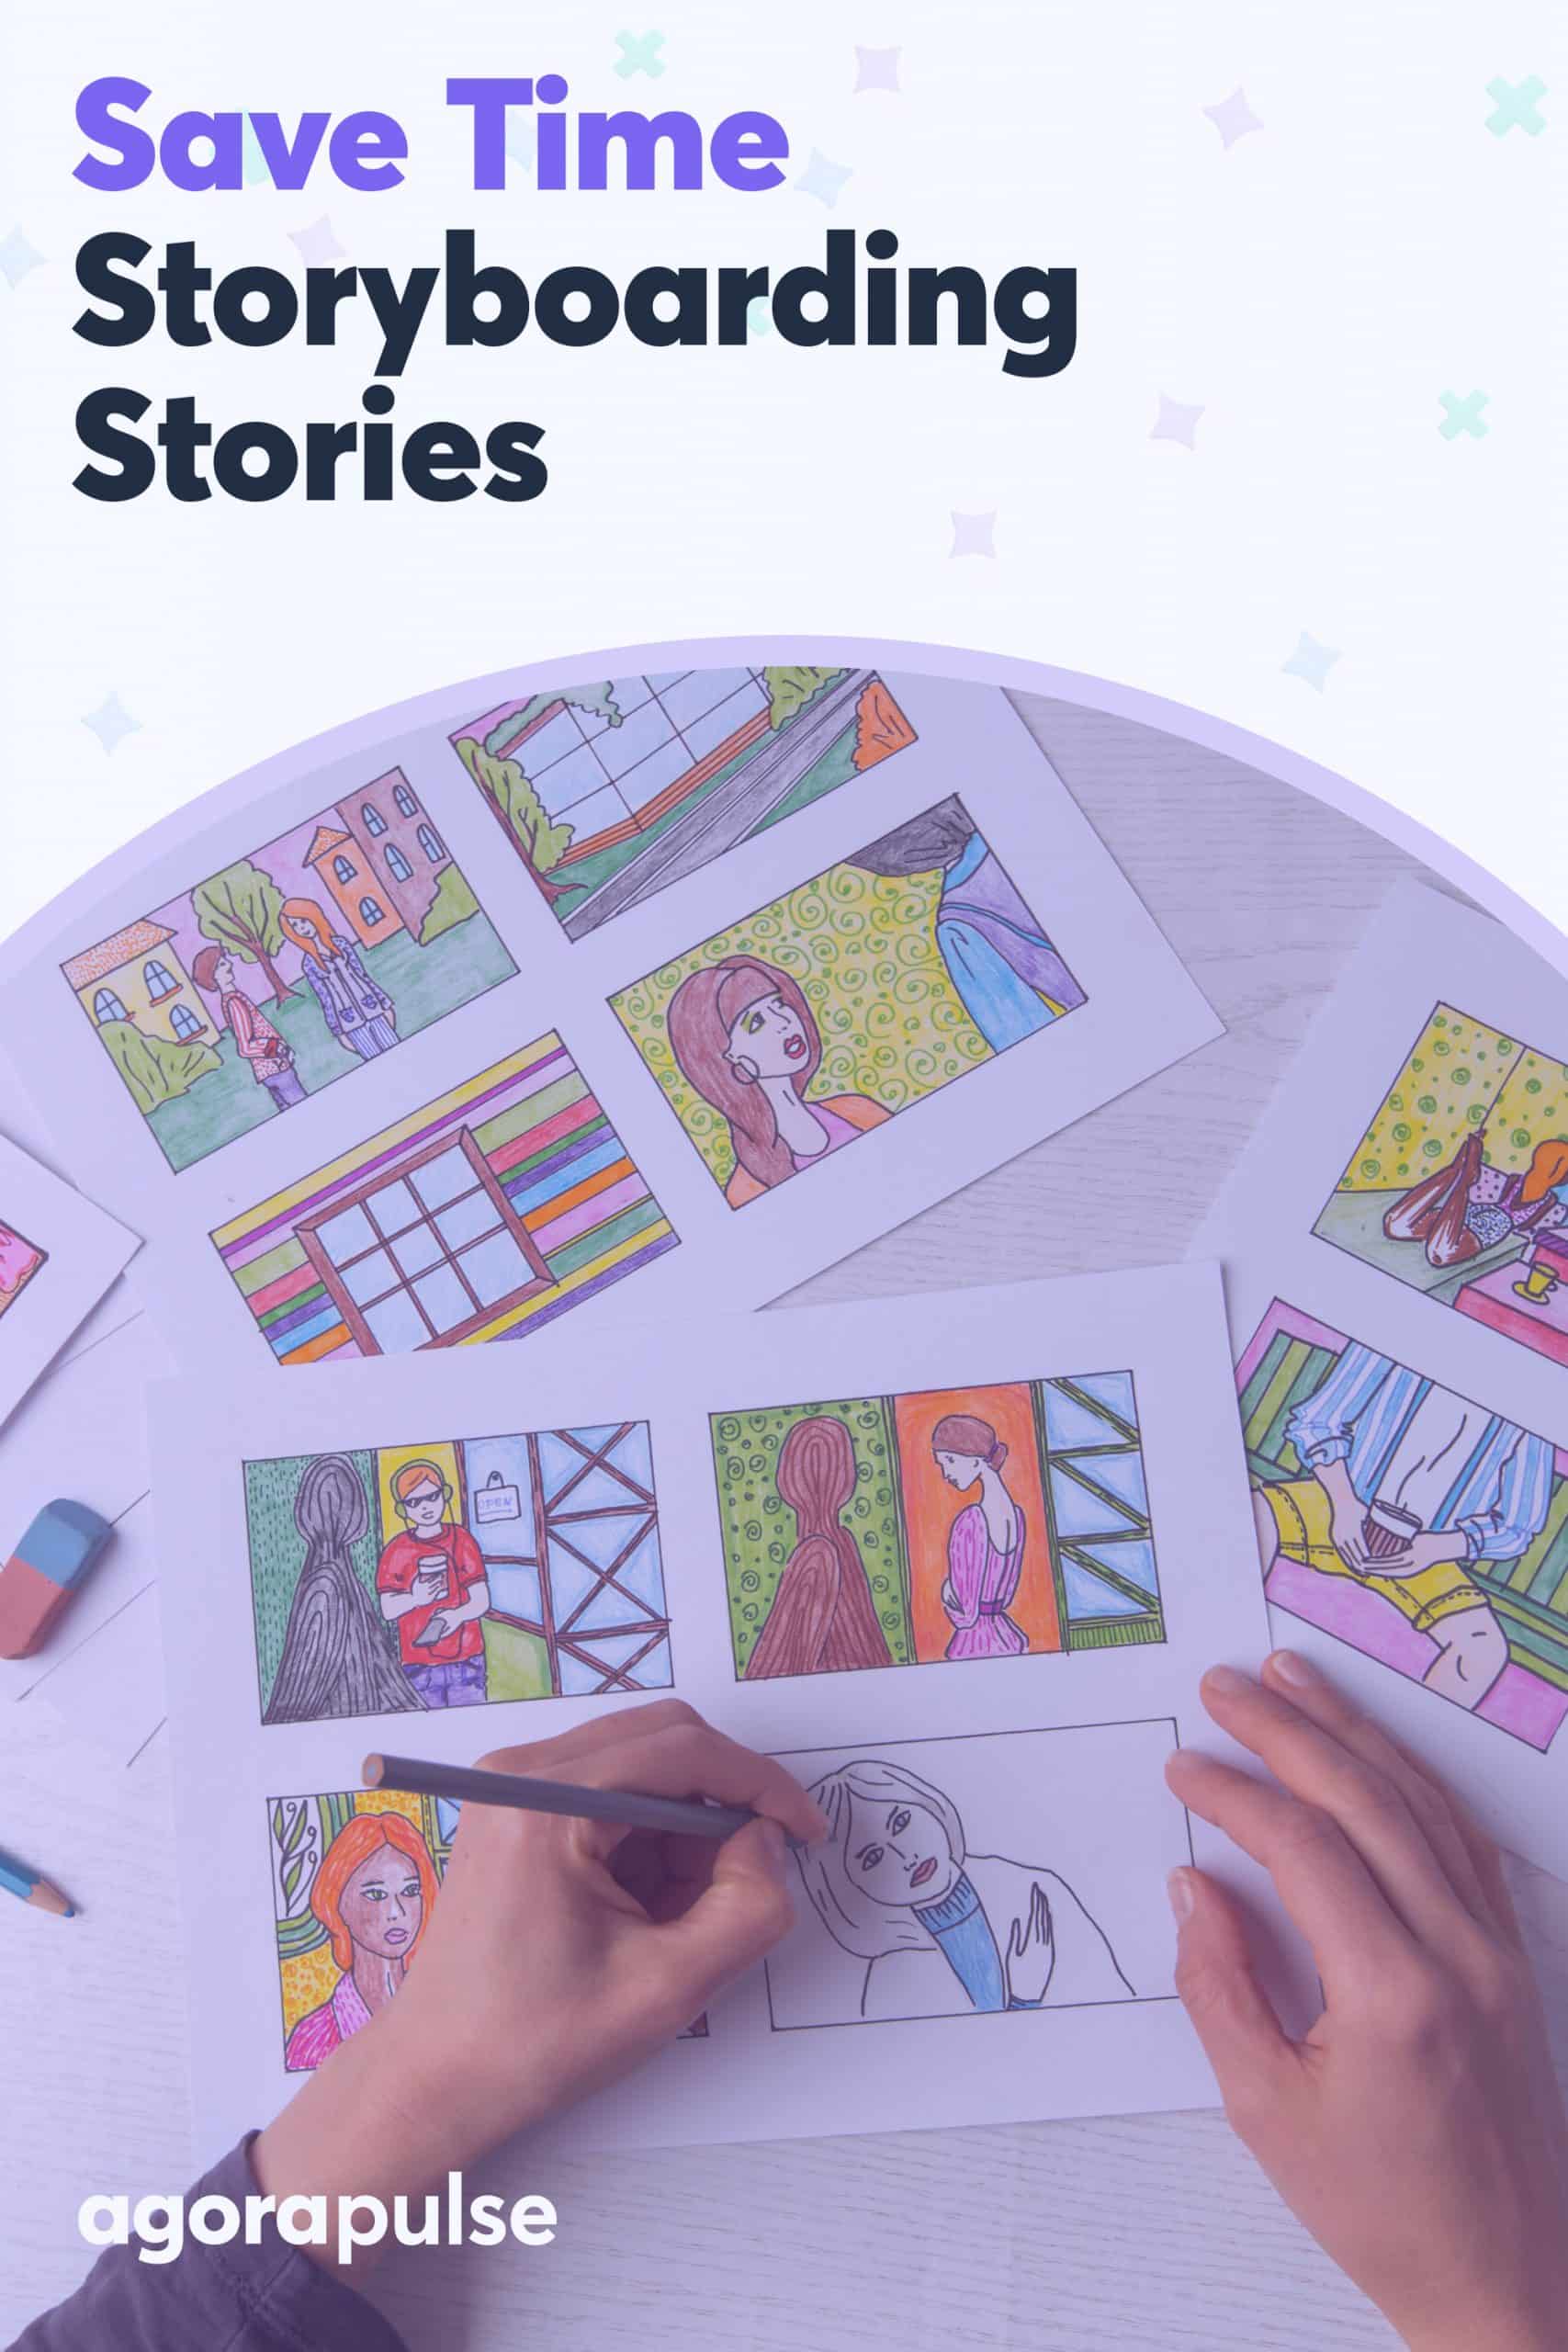 Time-Saving Tips for Storyboarding Your Instagram Stories